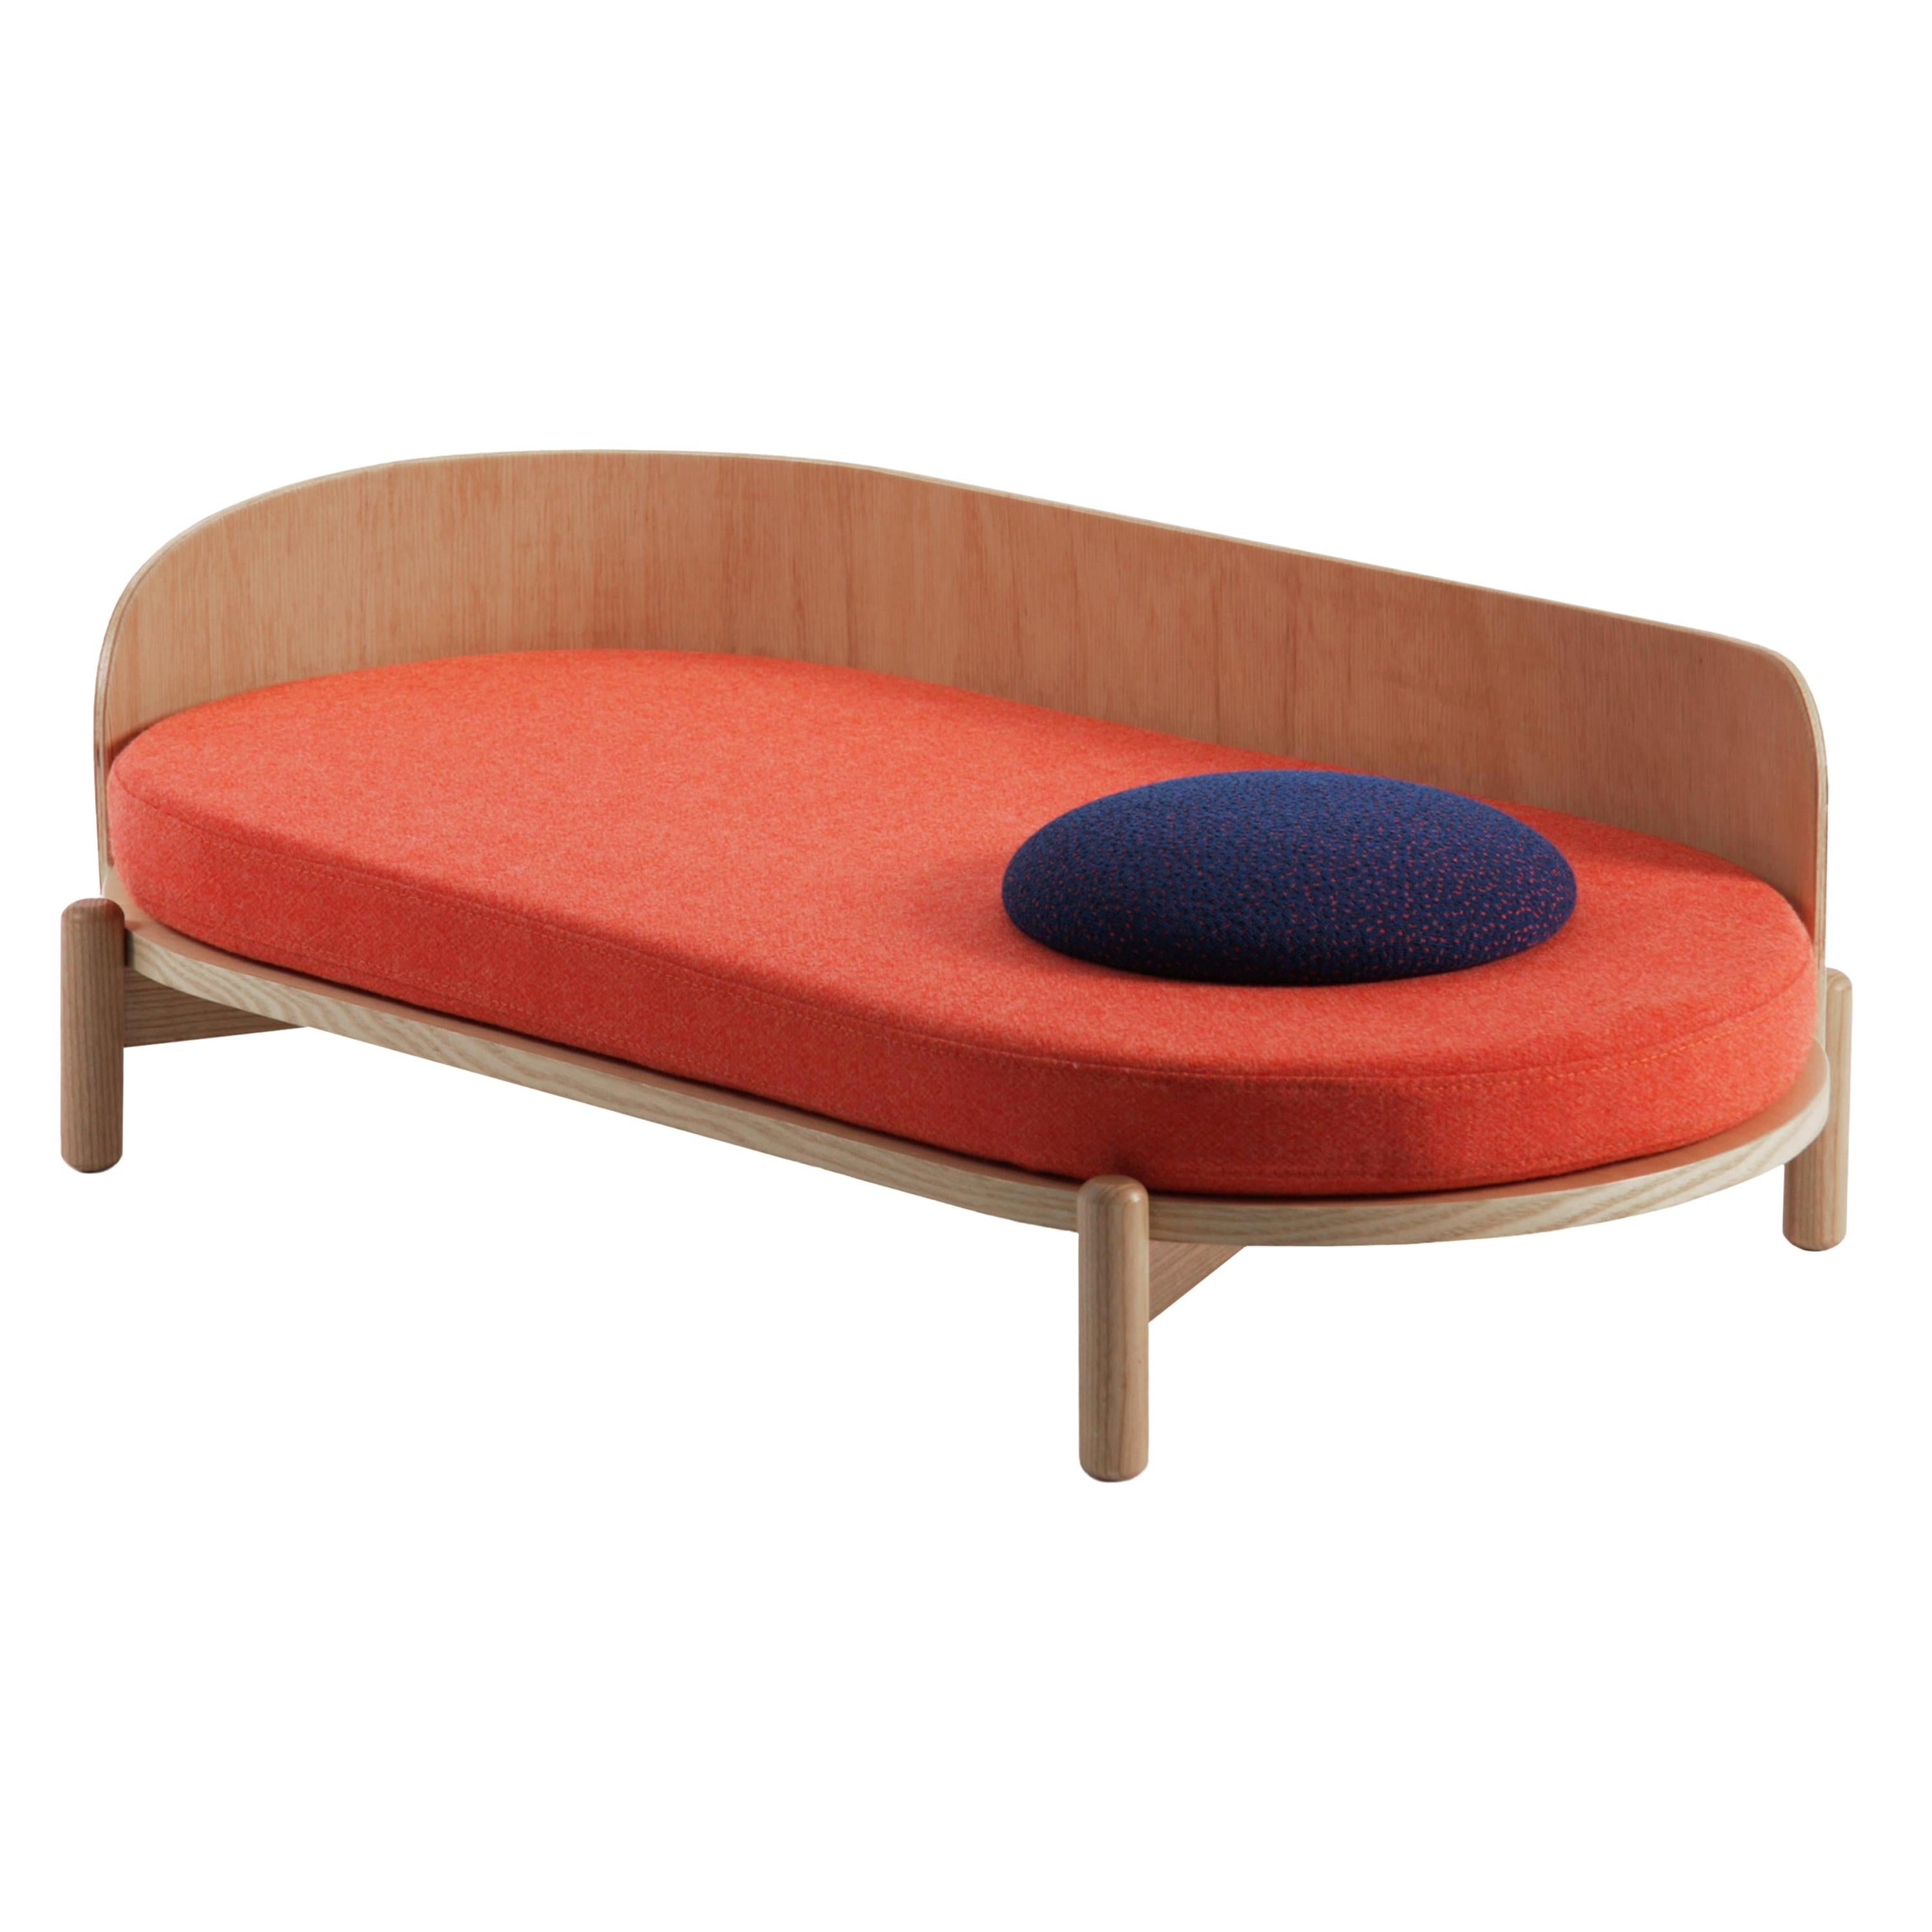 Chaise Longue "Knap" in American Oak and Mélange Coral For Sale